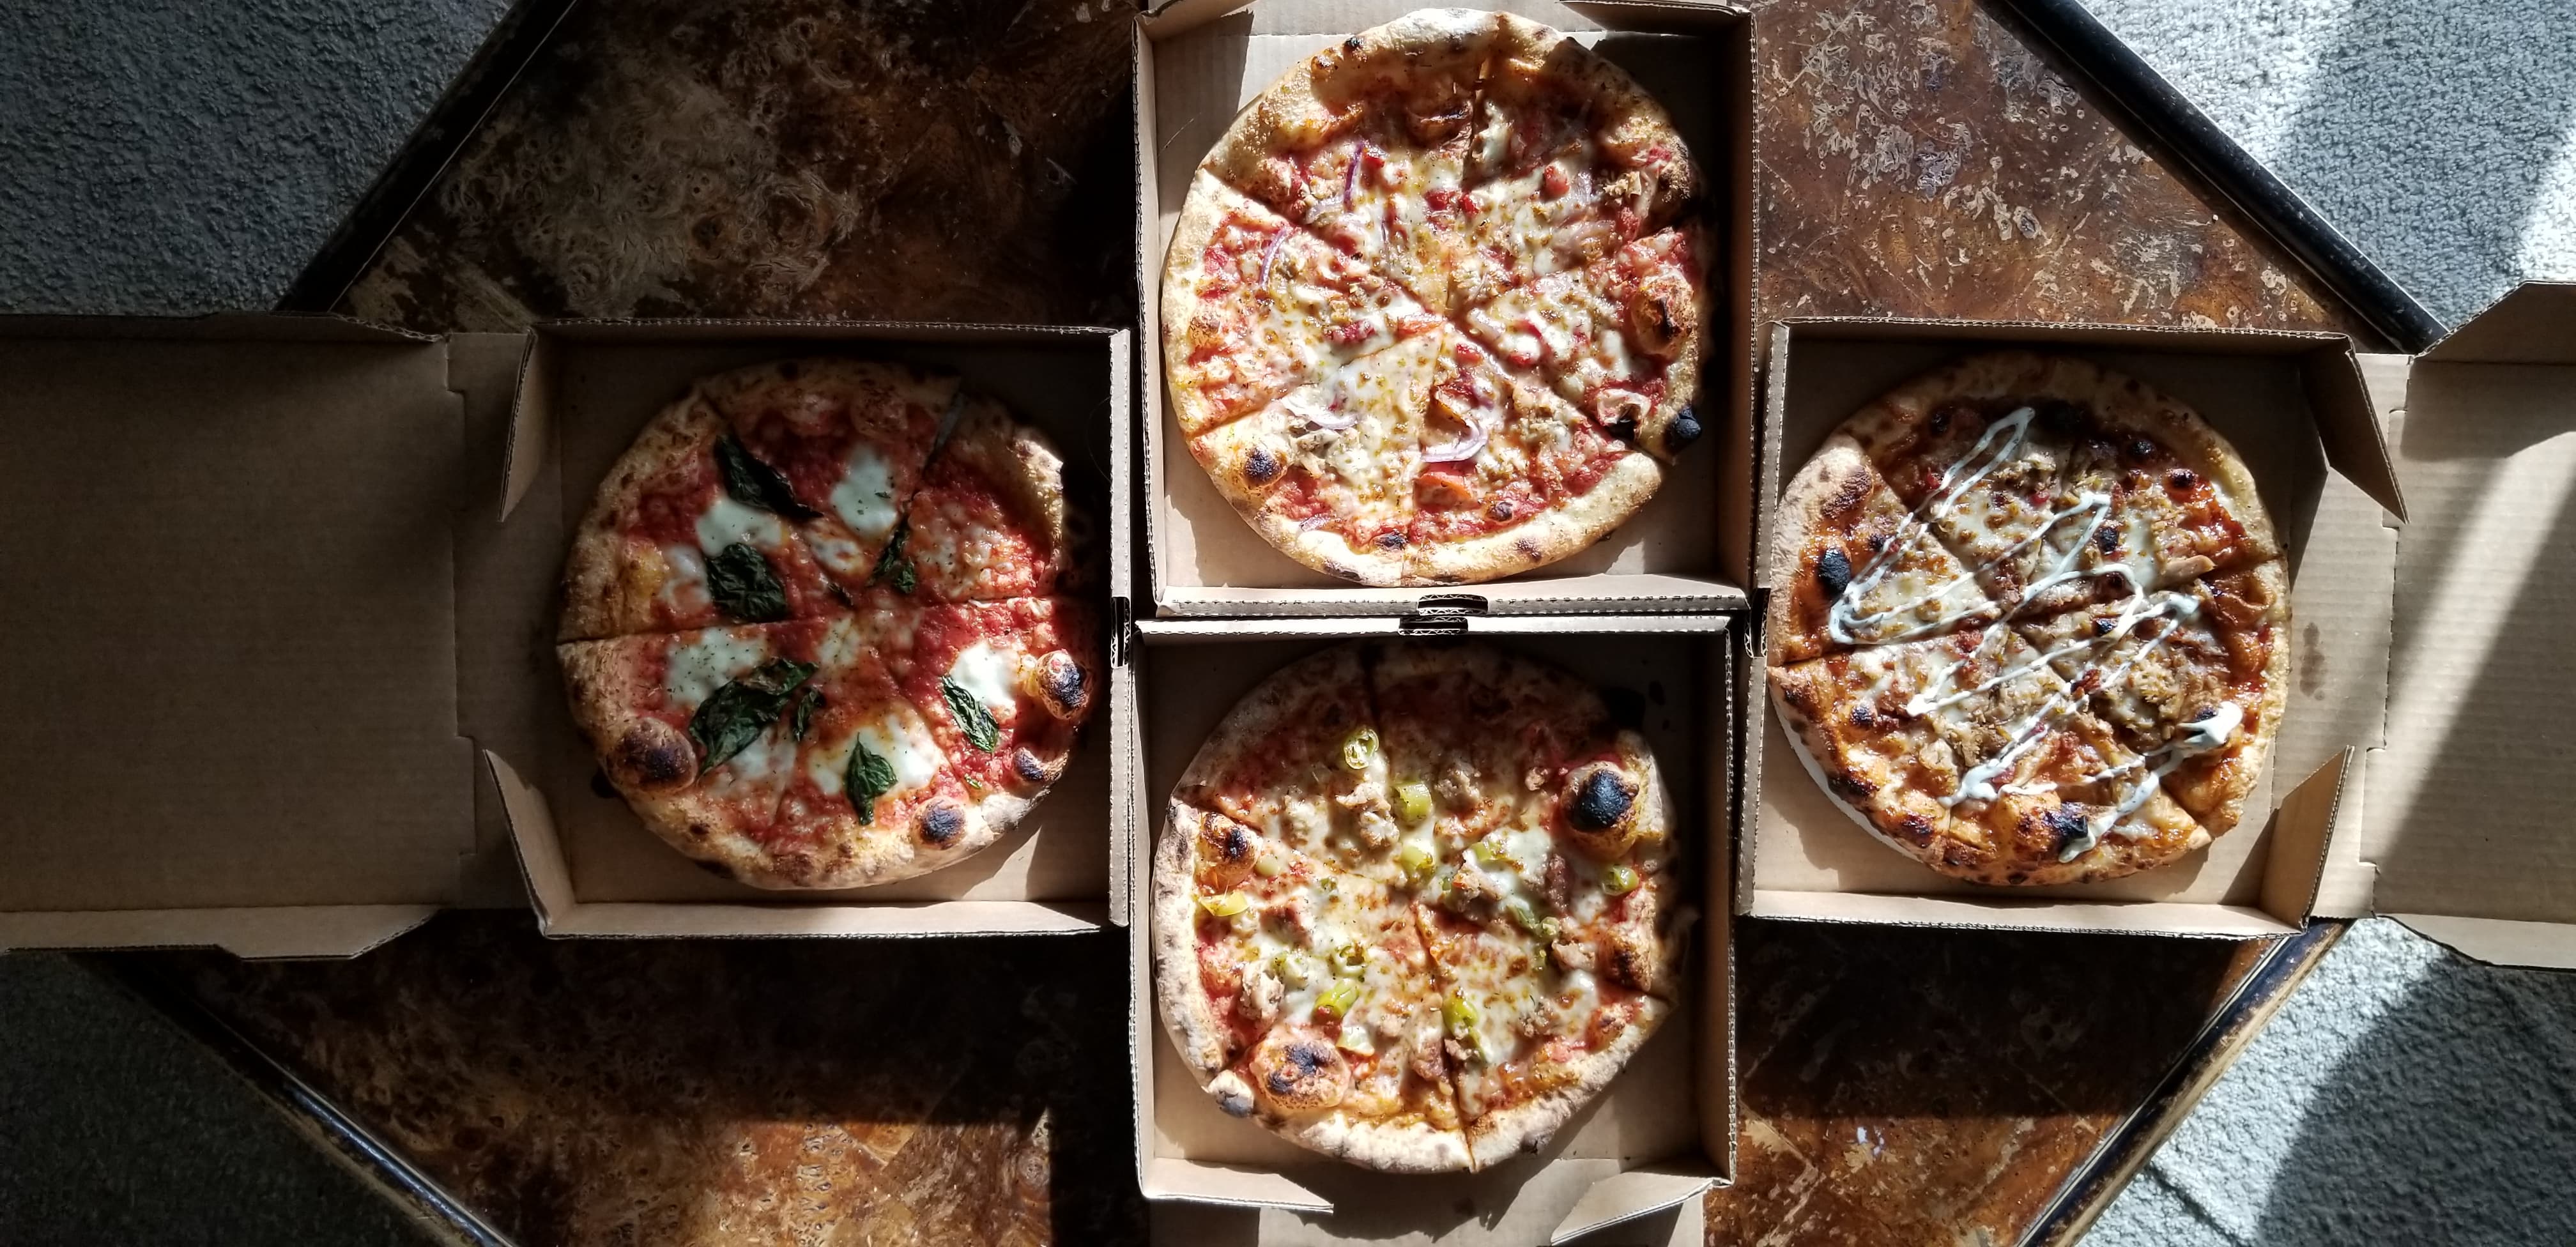 On a brown table, there are four pizzas in cardboard pizza boxes. The boxes are all open, and the sliced full pizza pies are circles inside the brown square boxes. Photo by Nina Hopkins.